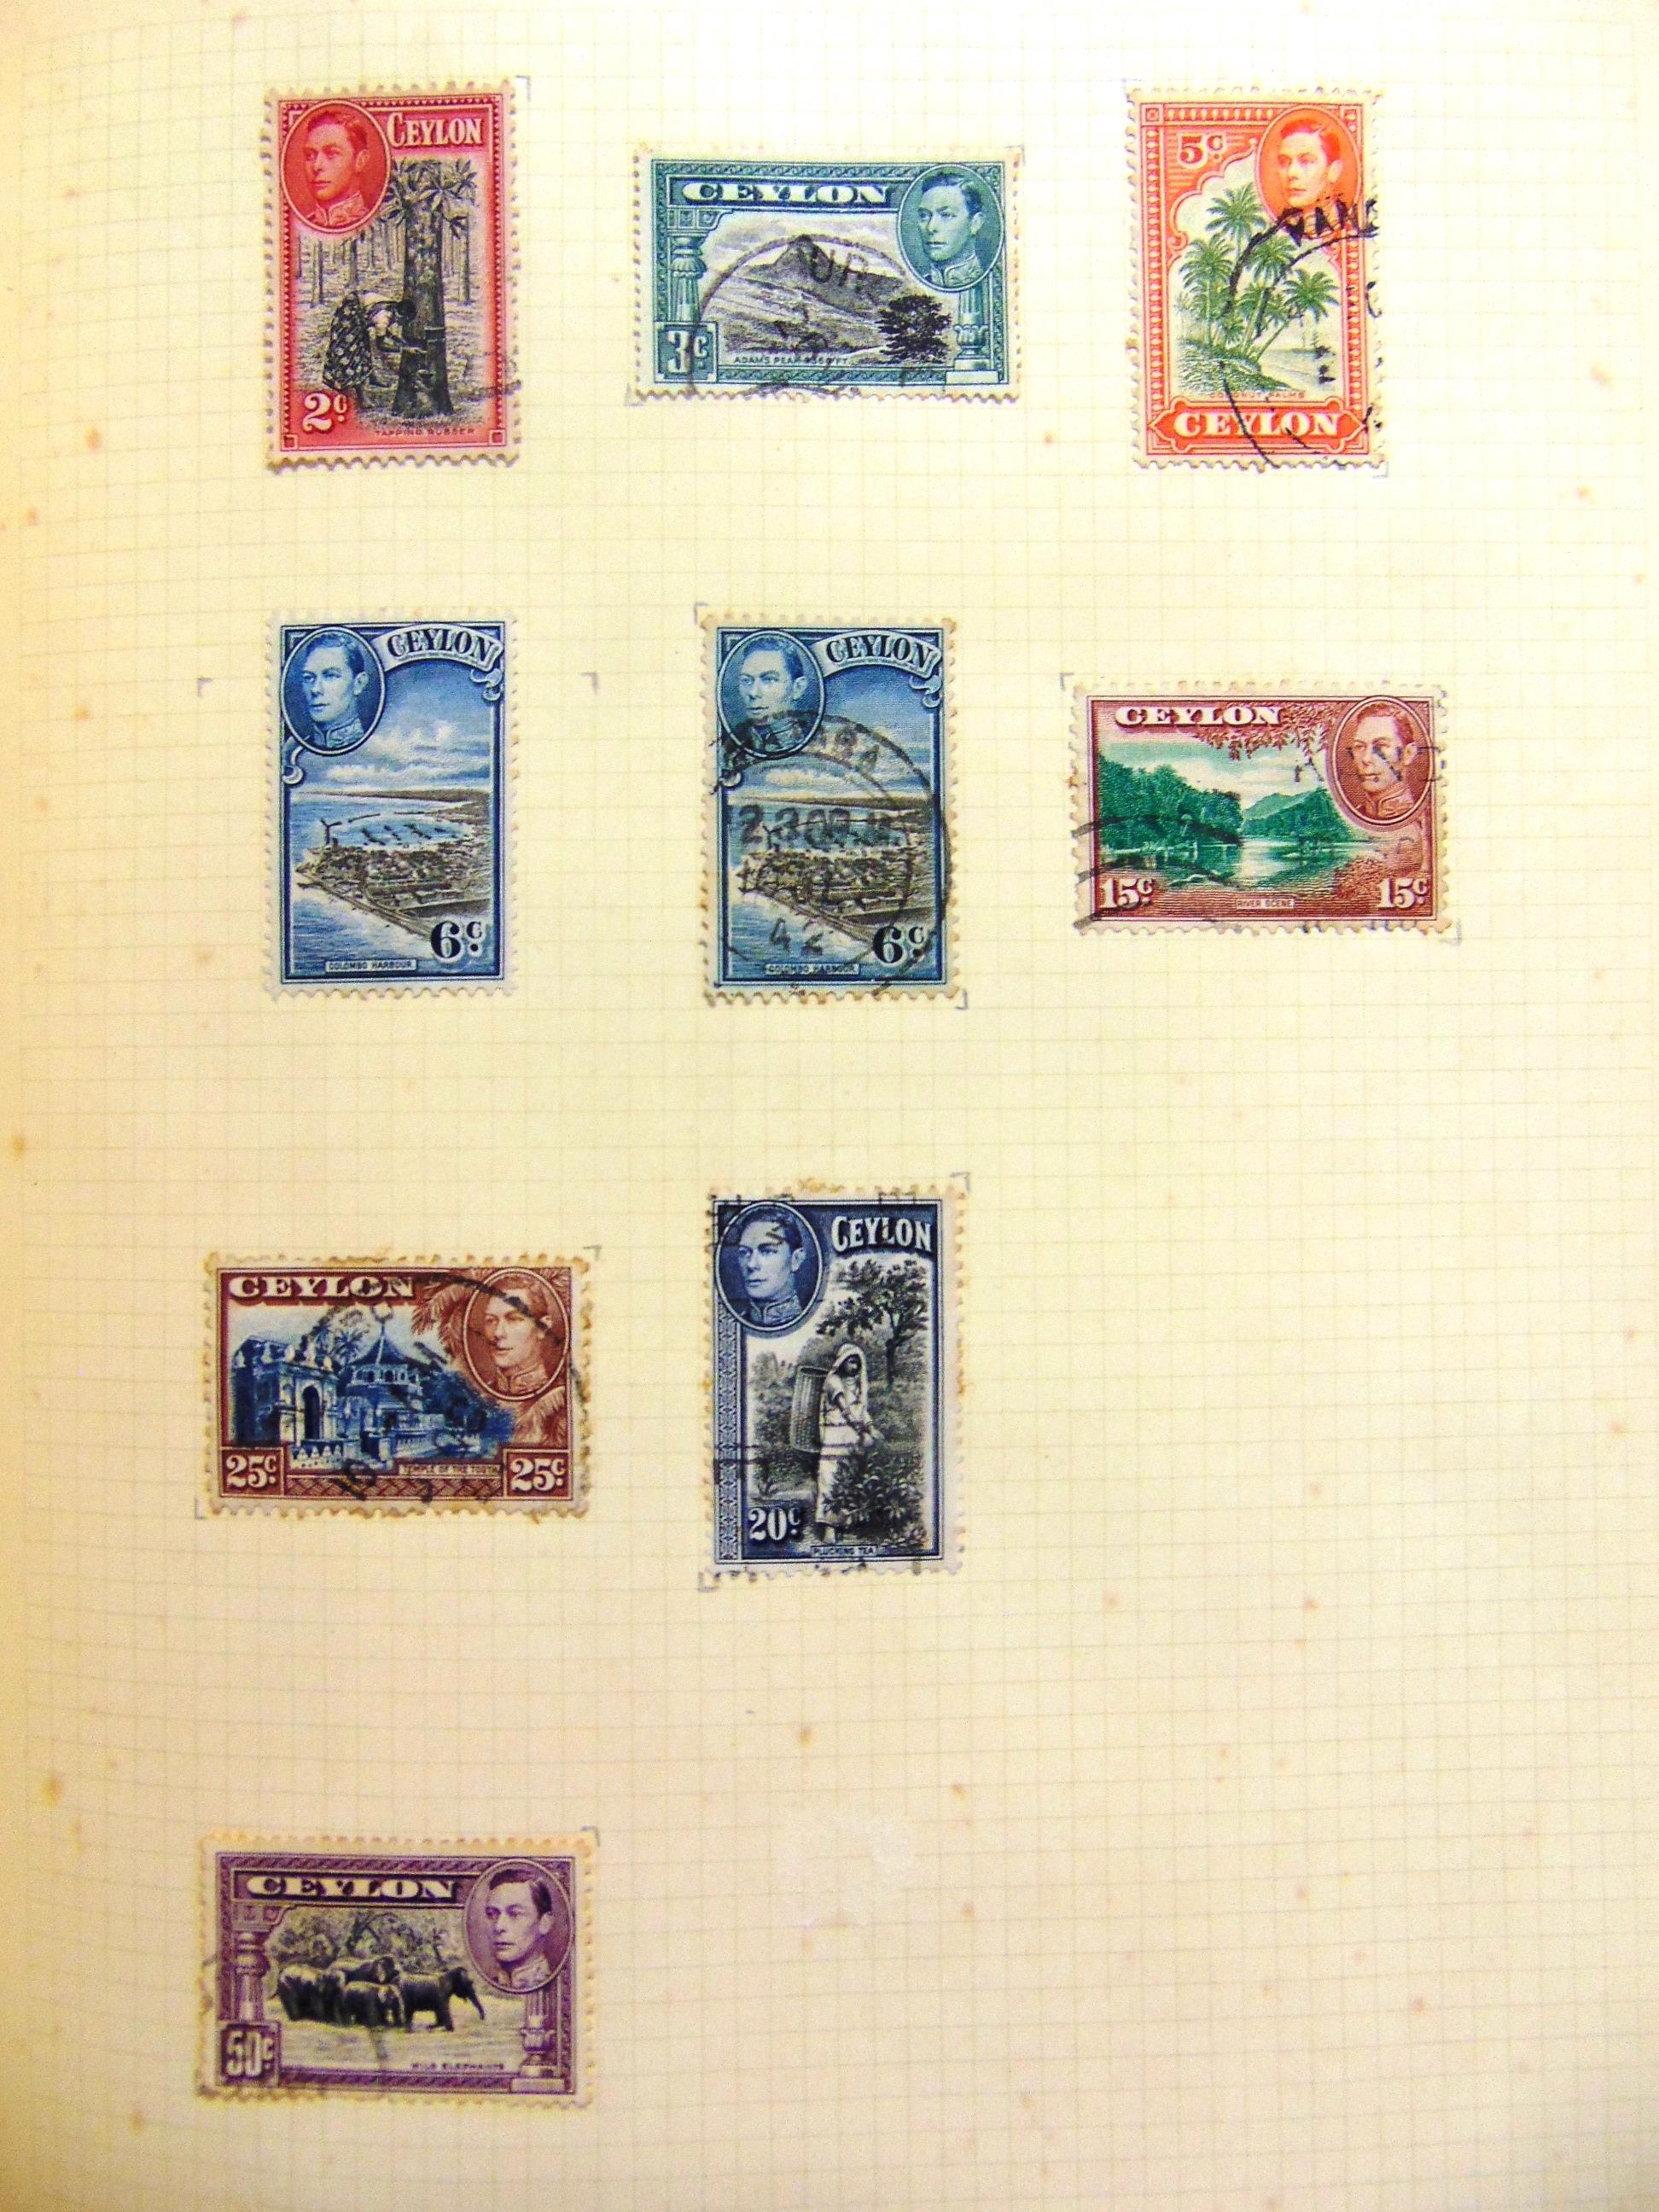 STAMPS - A PART-WORLD COLLECTION with noted Bulgaria, including also Australia, Canada and other - Image 5 of 6